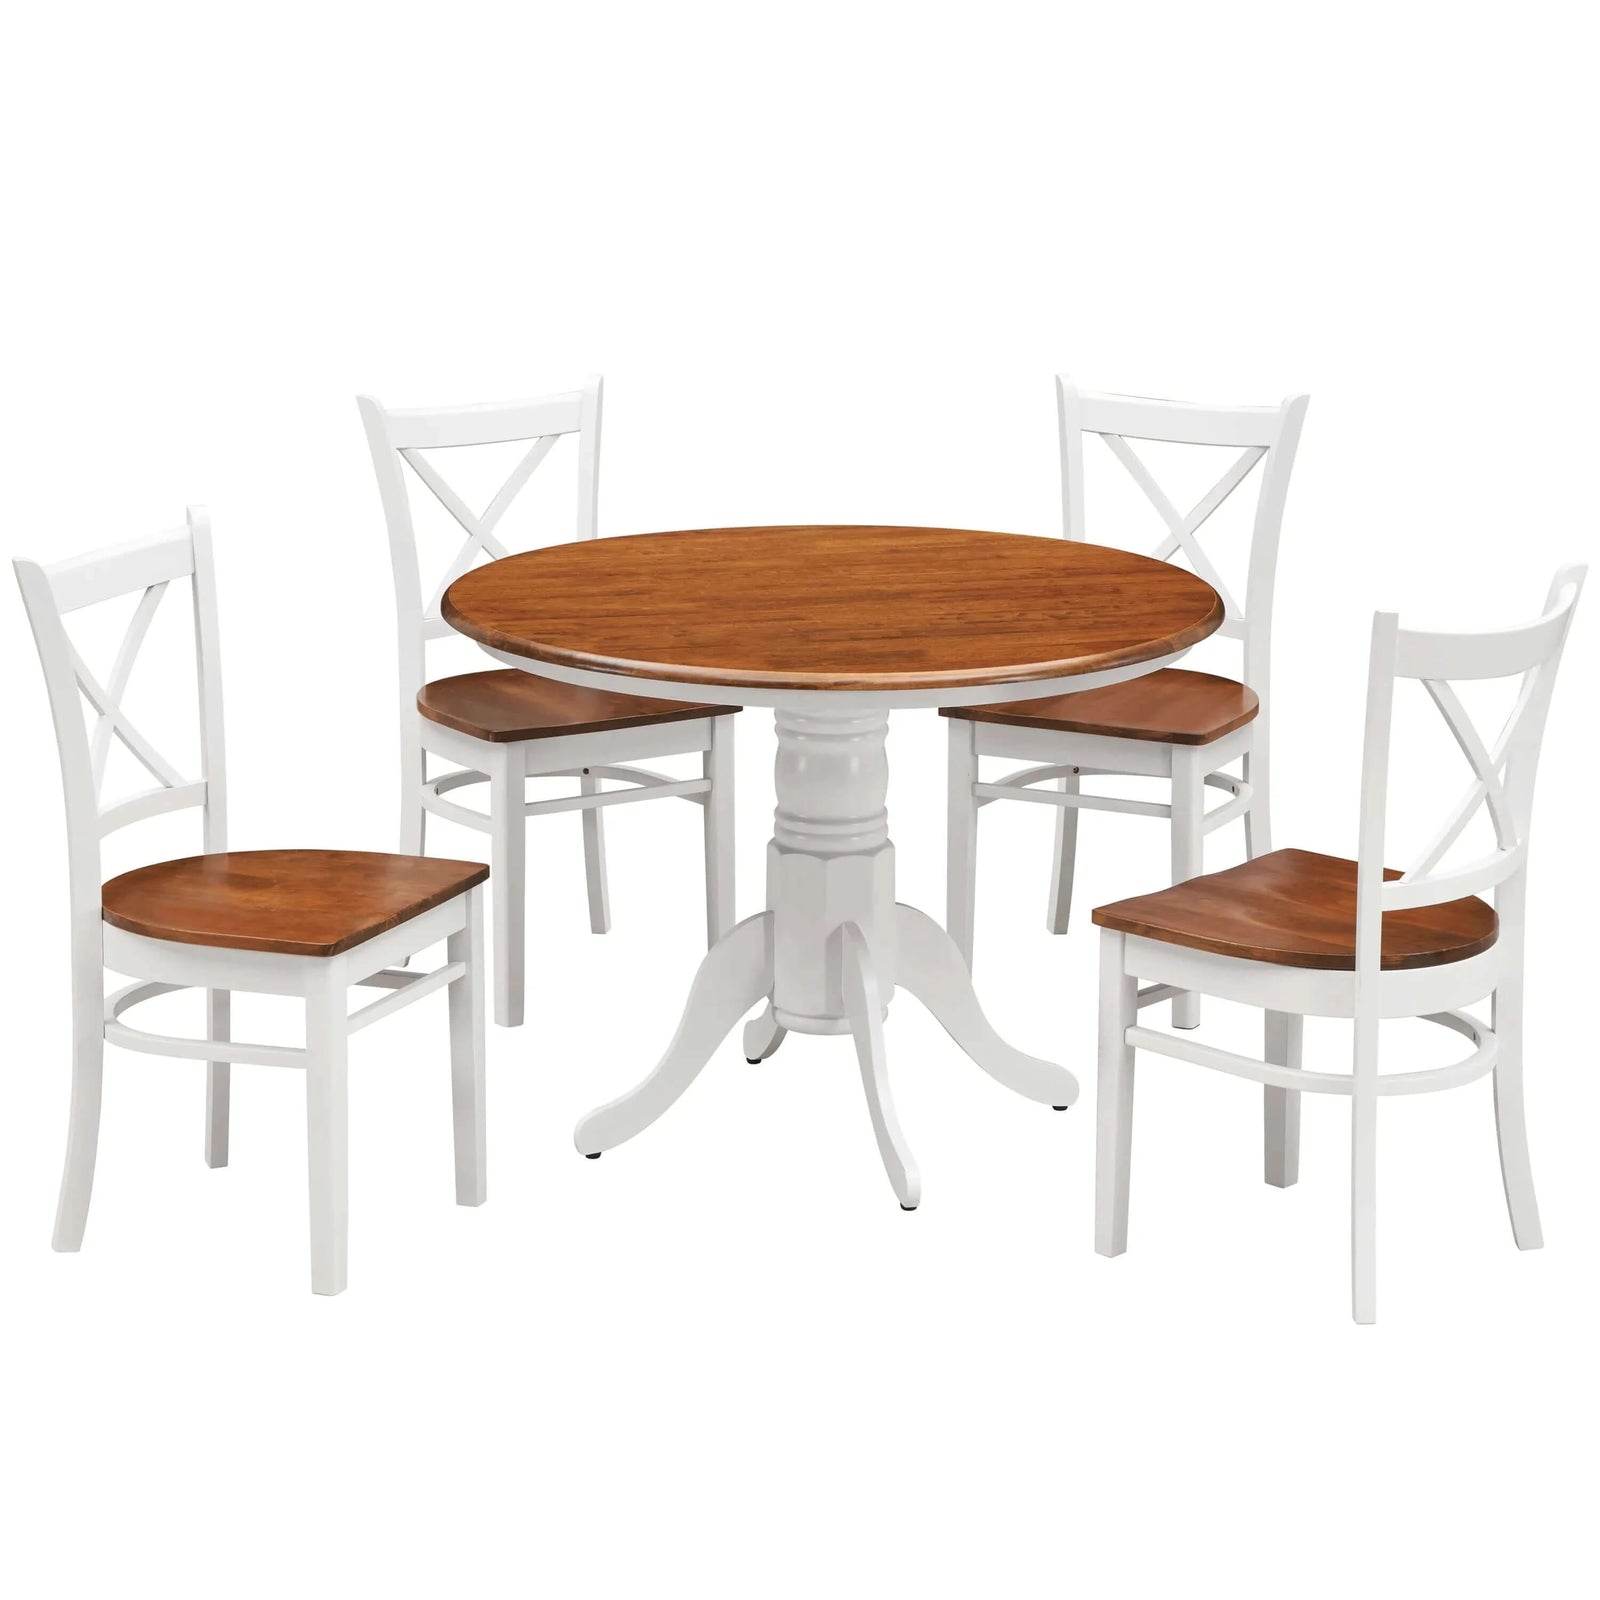 Buy lupin 5pc dining set 106cm round pedestral table 4 rubber wood chair - white oak - upinteriors-Upinteriors